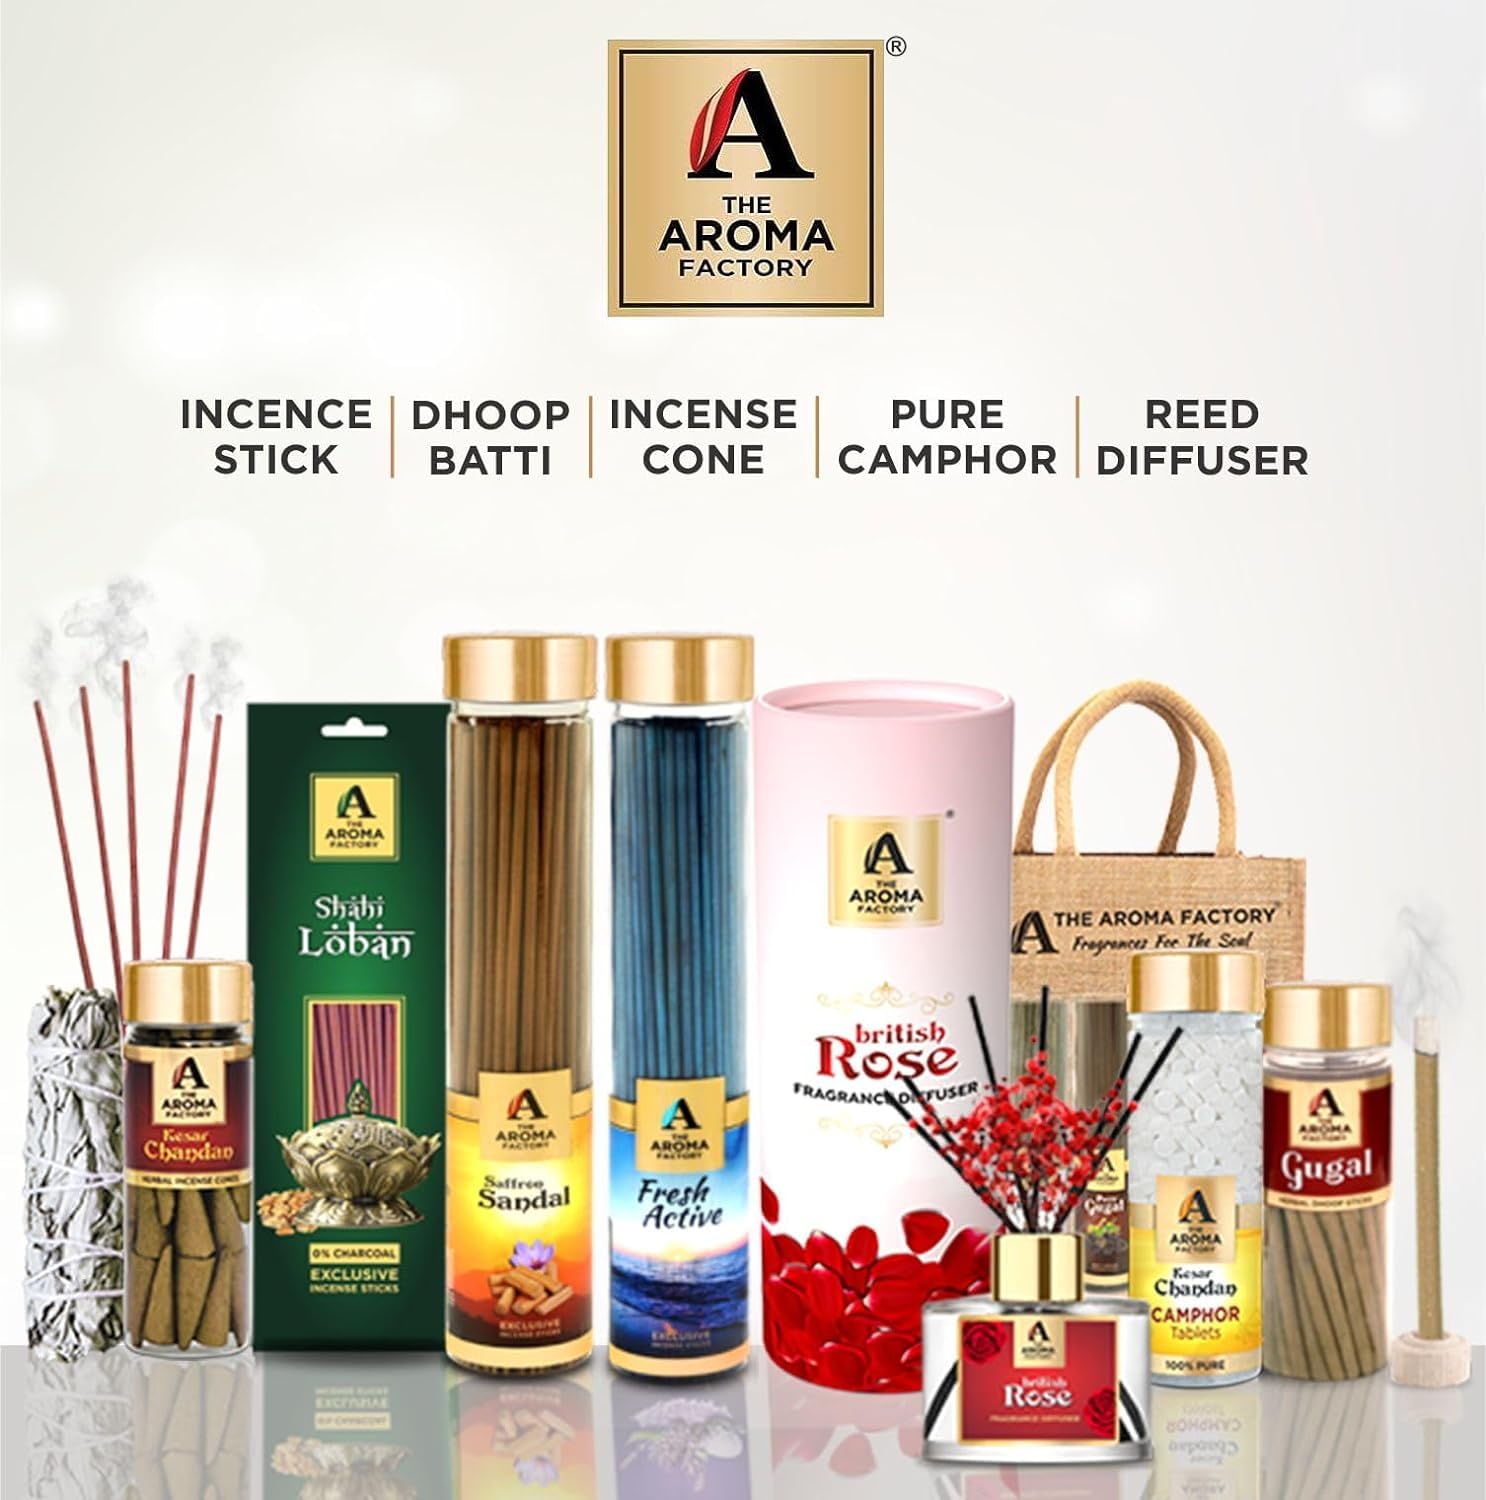 The Aroma Factory Happy Birthday Uncle Gift with Card (25 Swad Candy, Chocolate Agarbatti Bottle, Rose Cone) in Jute Bag